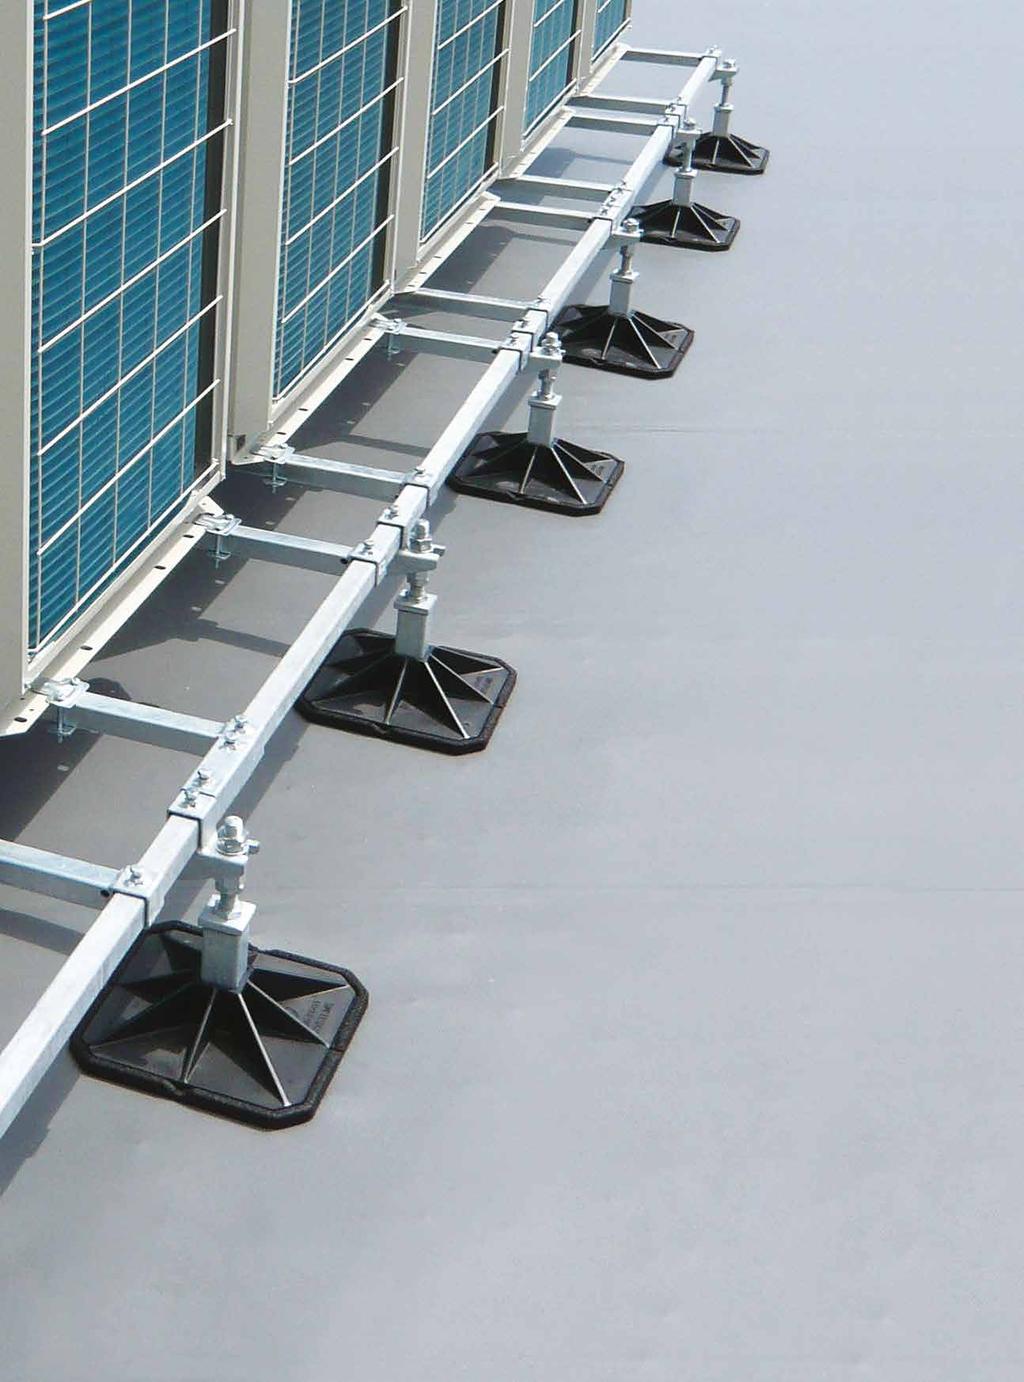 Simply a better way ABOUT US Big Foot Systems are the largest rooftop free-standing frame manufacturer in the world.